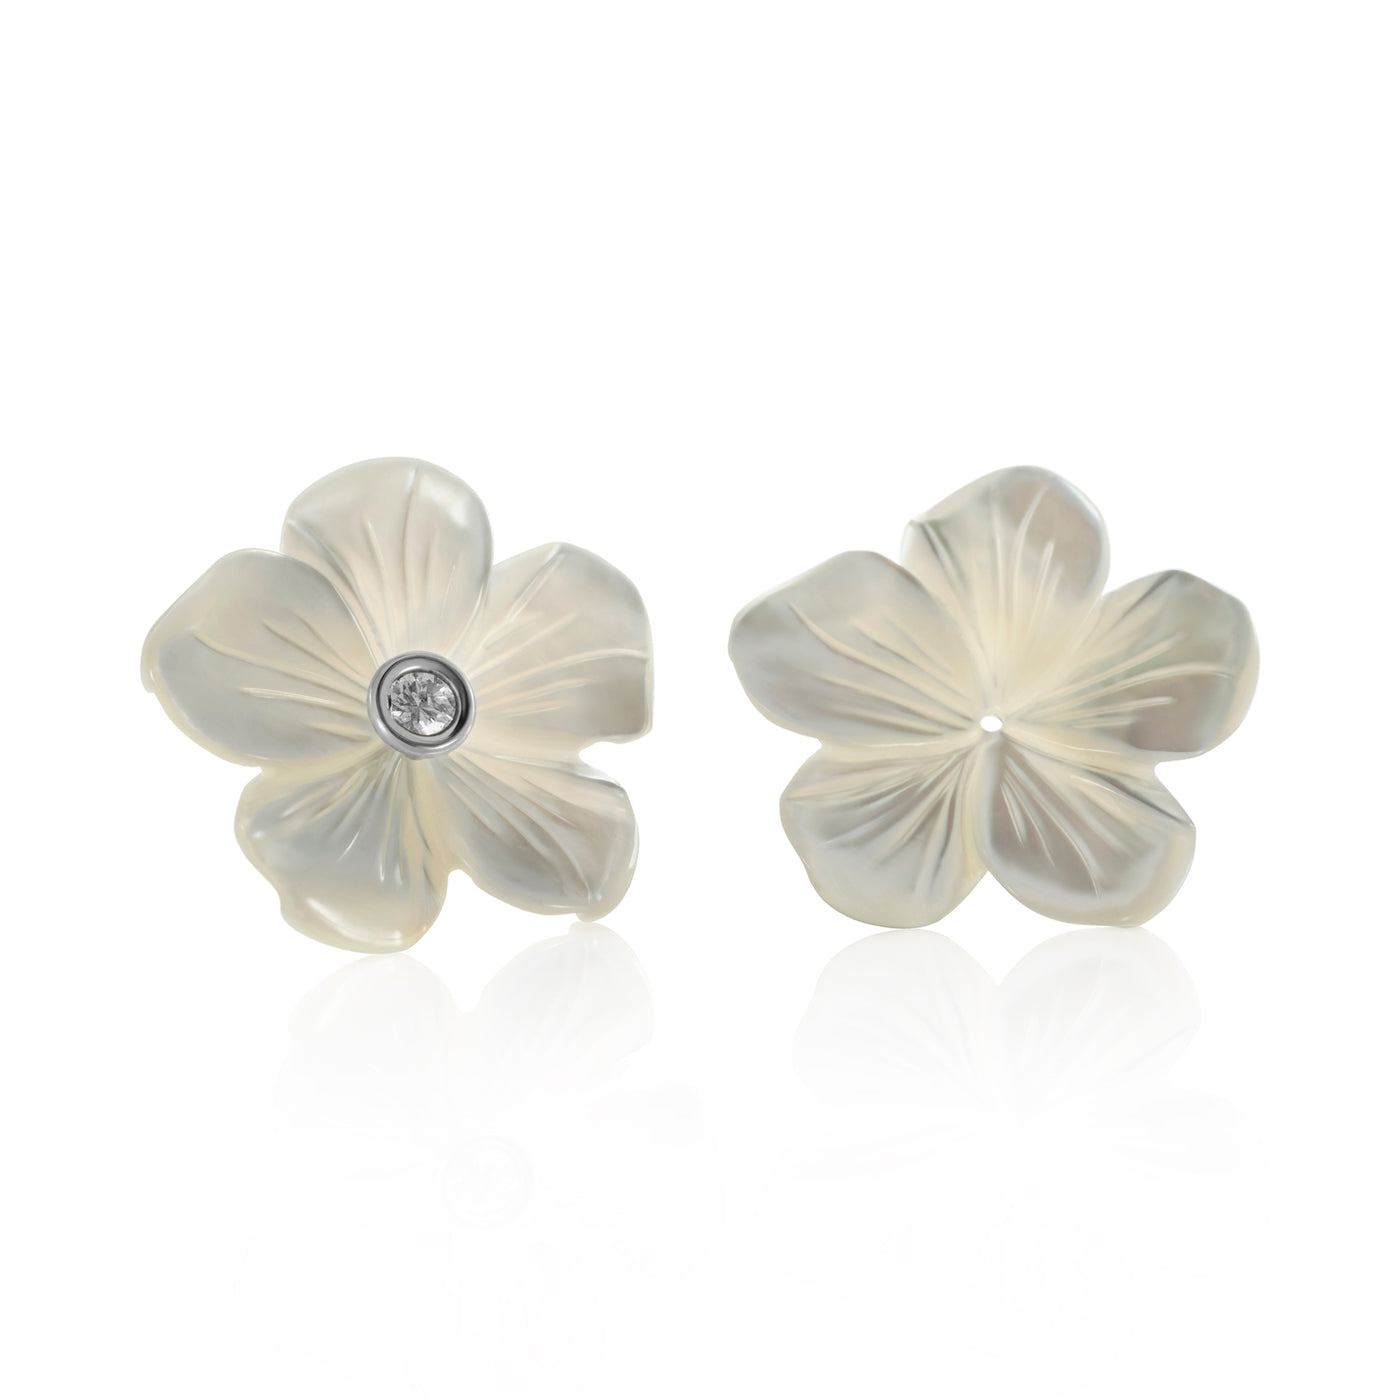 Precious flowers * Mother of pearl 5 petals - 24 mm